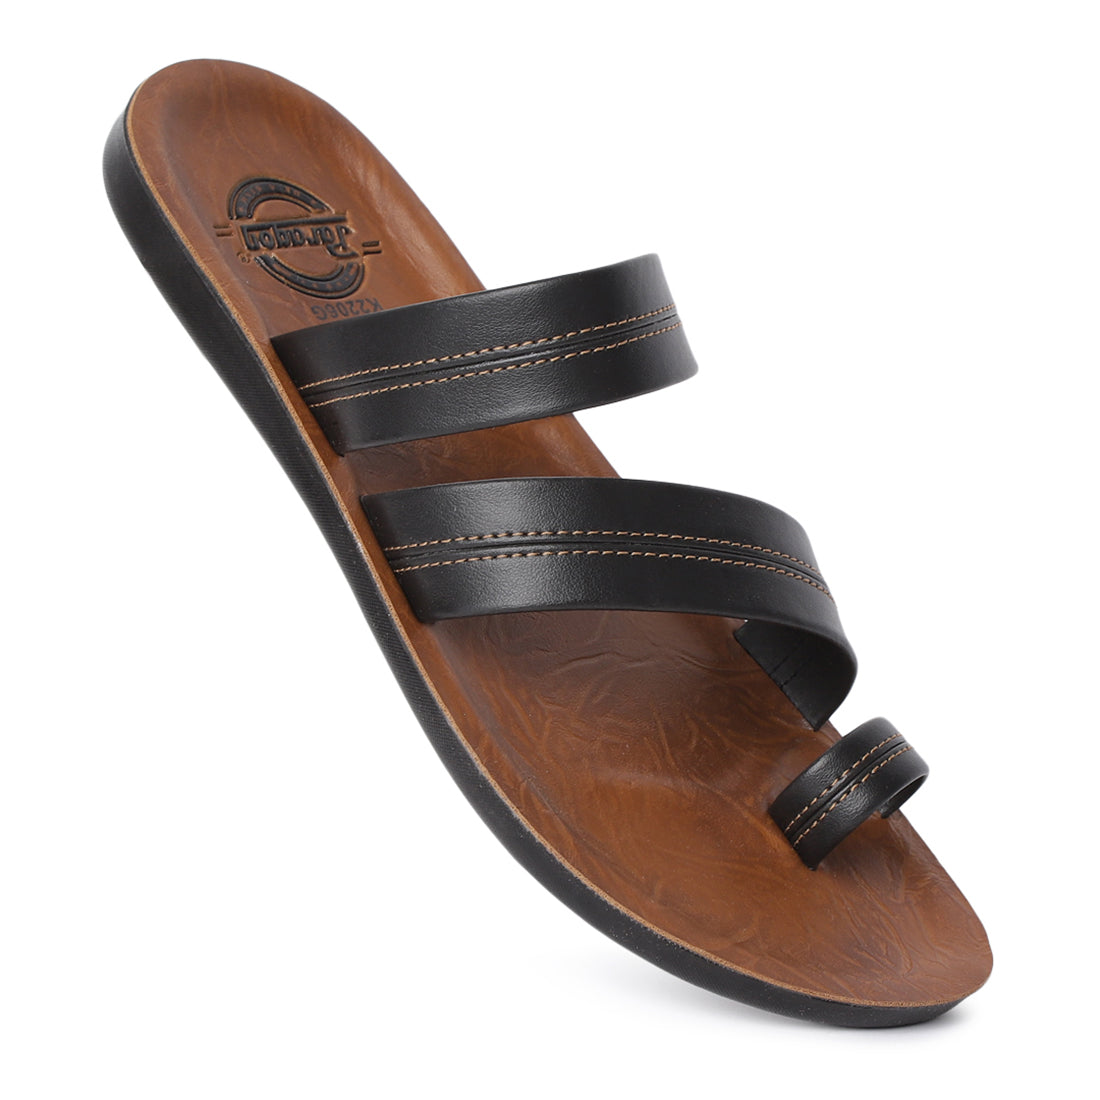 Paragon  PUK2206G Men Stylish Sandals | Comfortable Sandals for Daily Outdoor Use | Casual Formal Sandals with Cushioned Soles